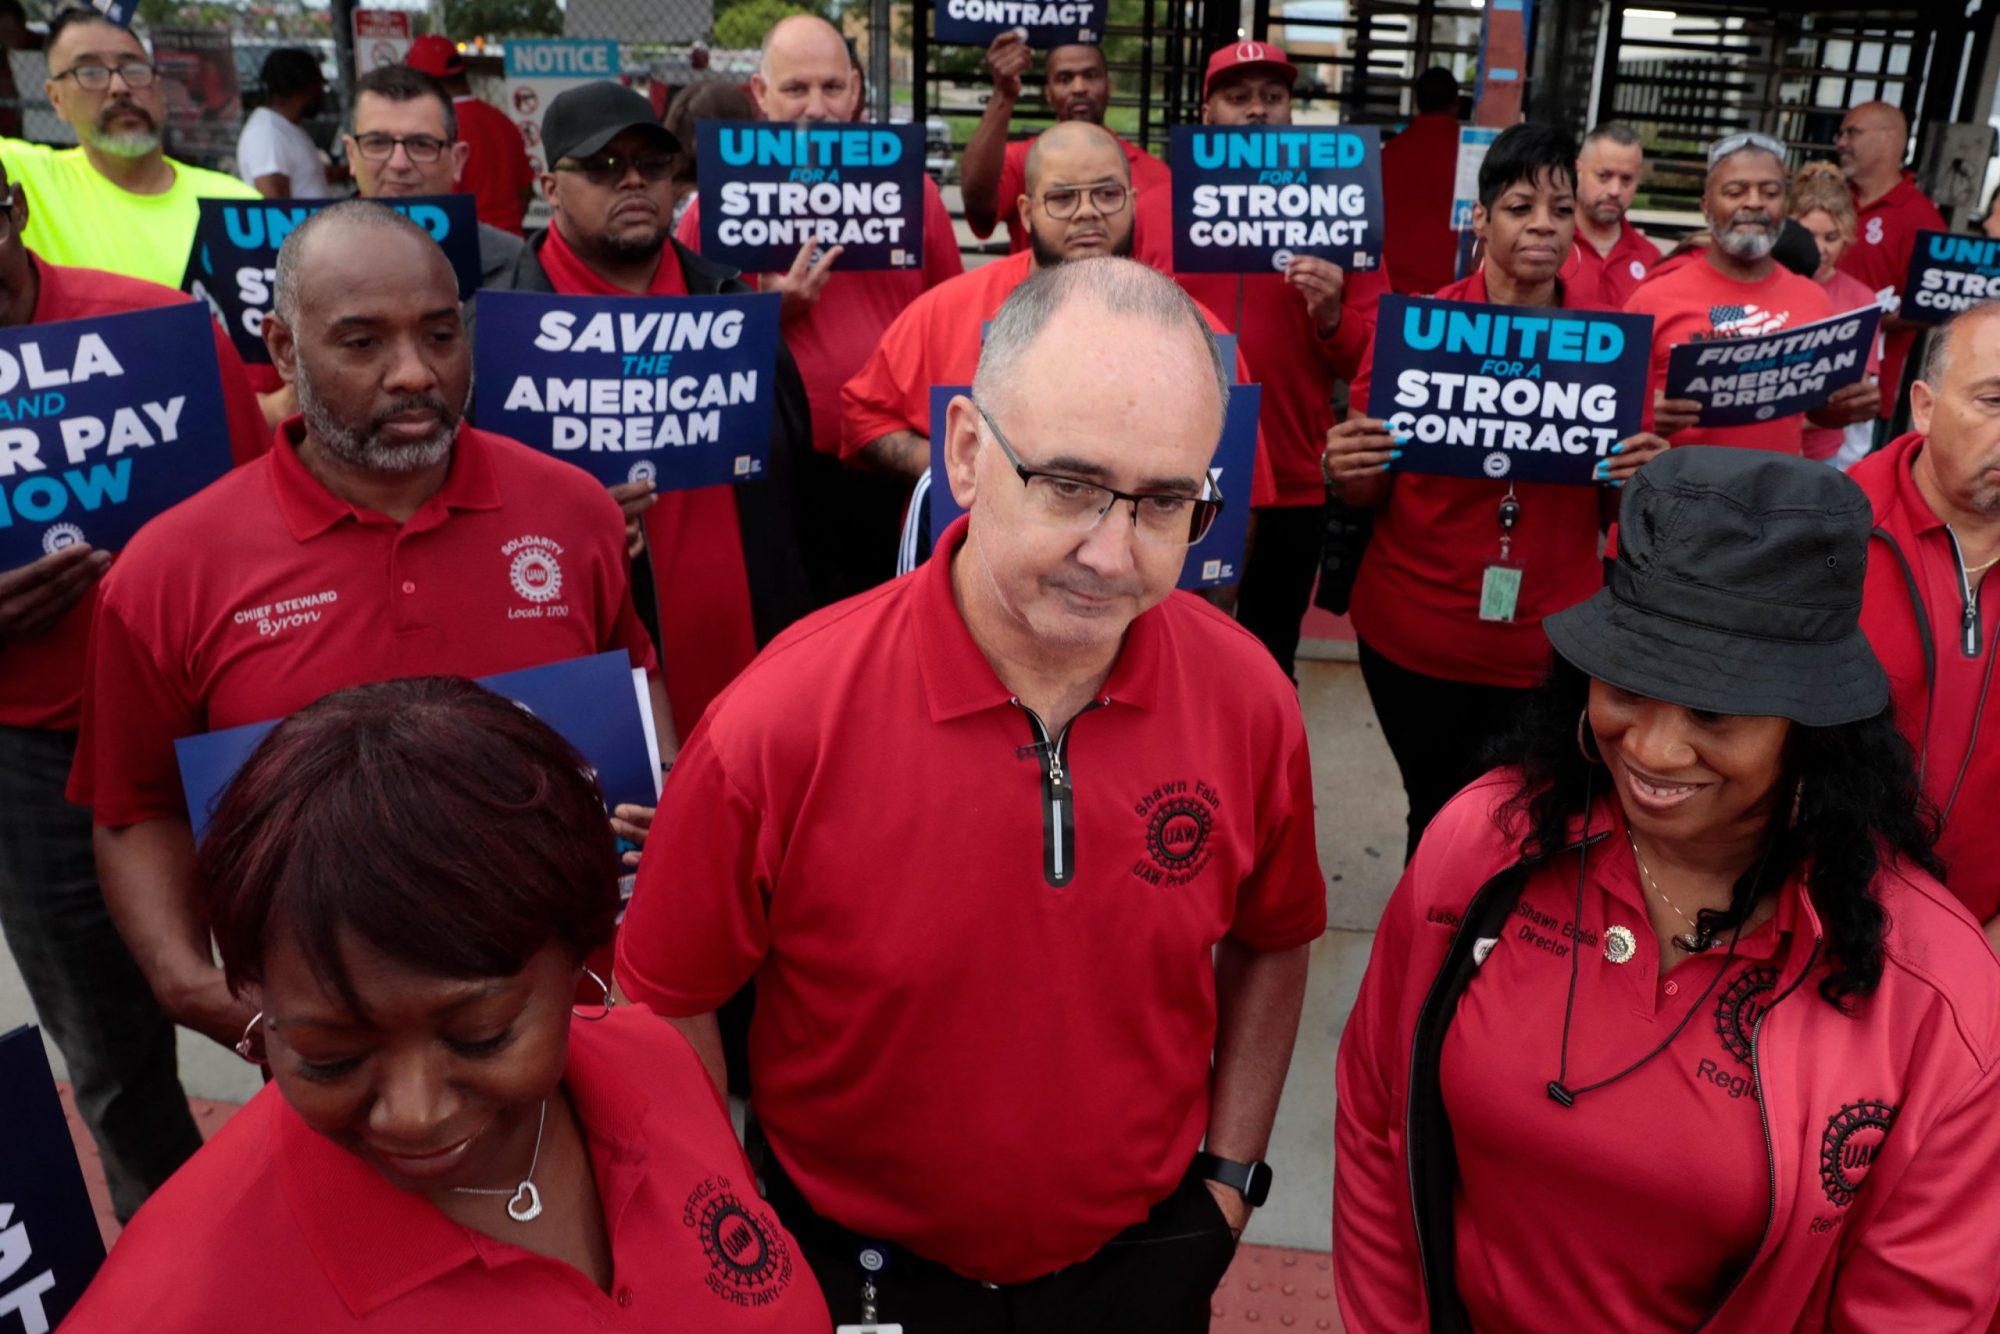 A group of UAW workers in matching red shirts stand together in a group, holding signs demanding a fair contract.